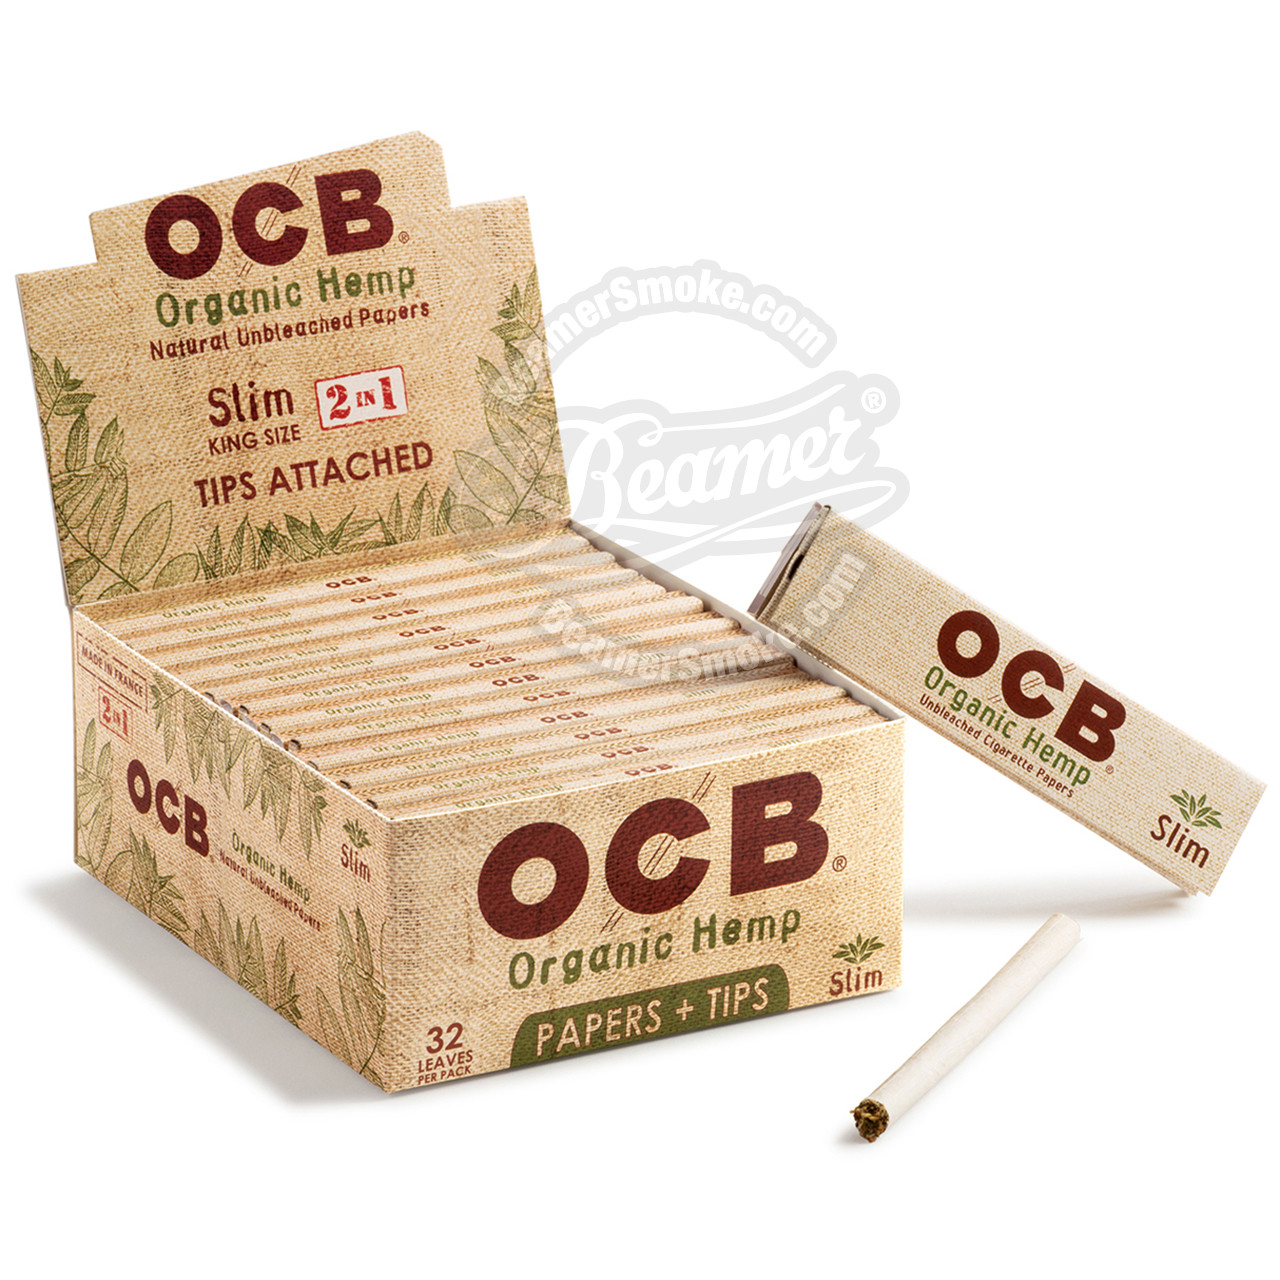 12x Packs OCB Organic King Size Slim With Tips 32 Papers Each Pack Roll Paper 